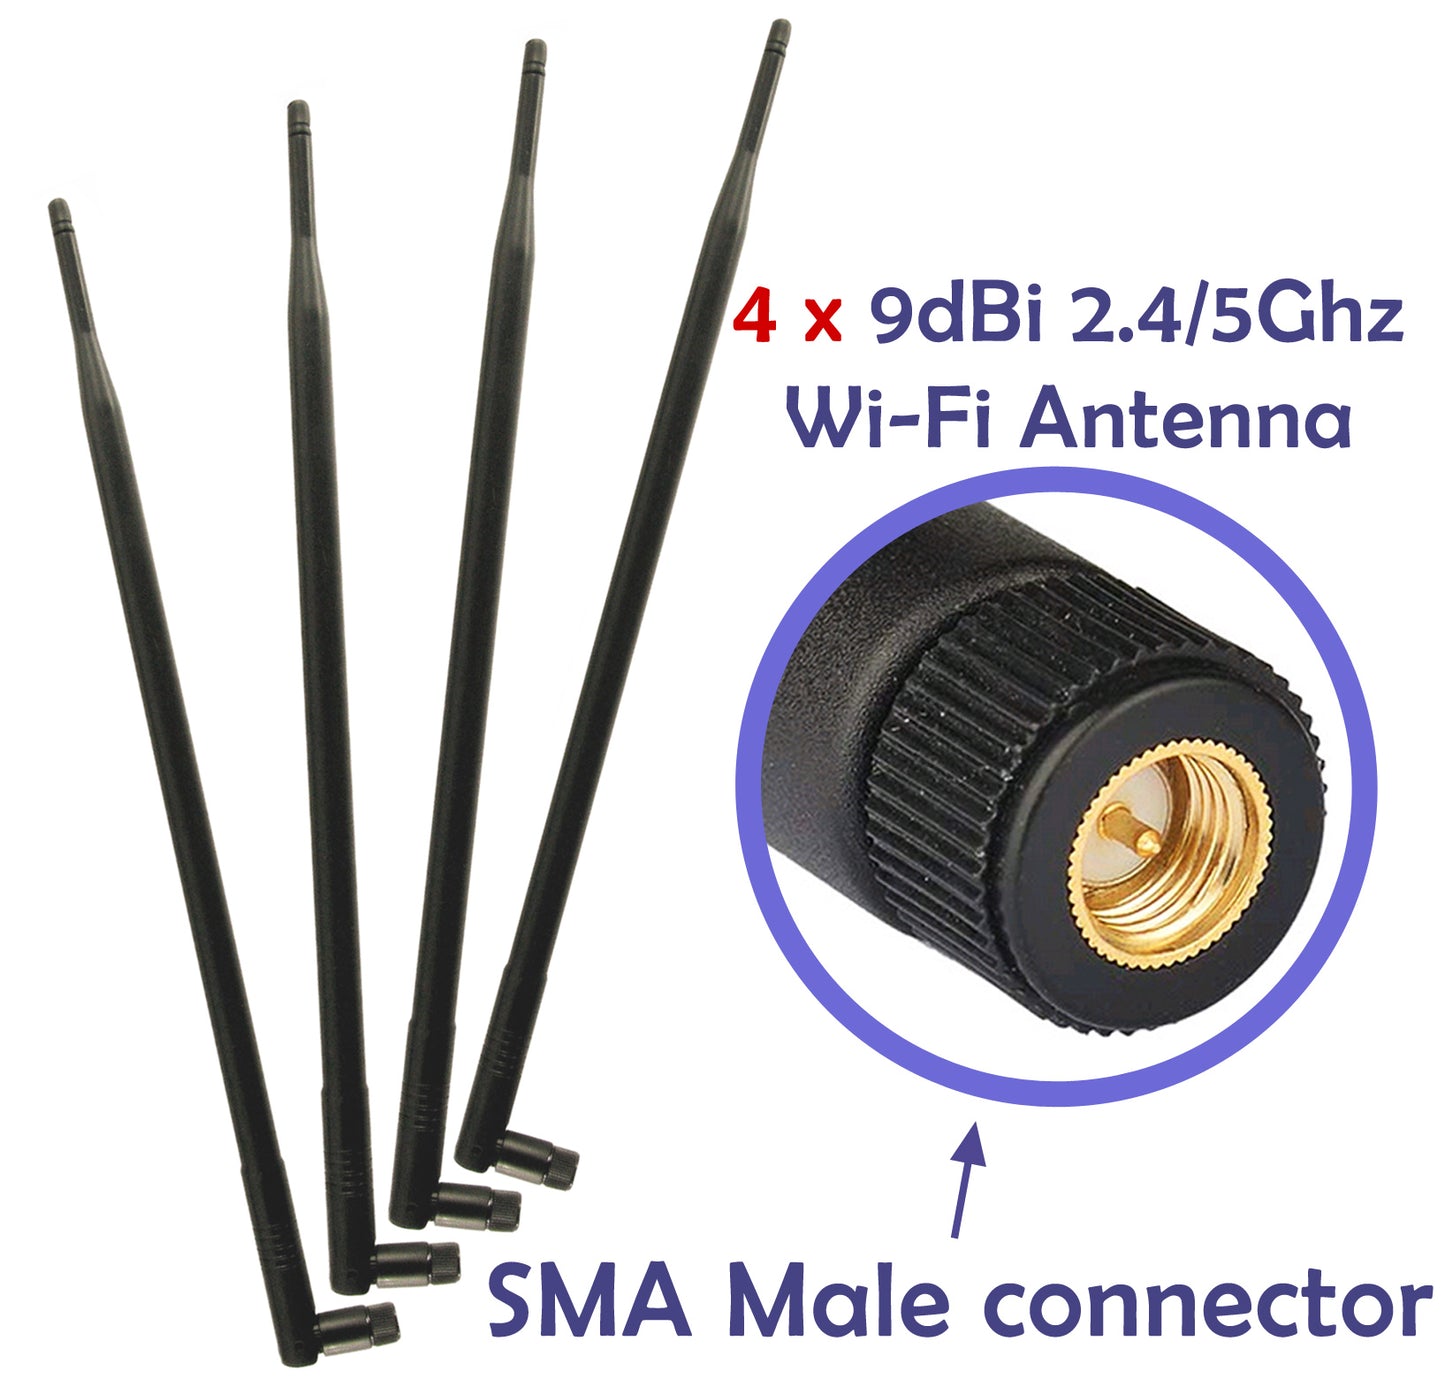 4 pcs of Universal 9dBi Wi-Fi 2.4/5GHz Dual-Band SMA Male Antennas Extension for IP Wireless Security Camera Router and CCTV HD Wireless Camera System Video Antenna for NVR Security IP System